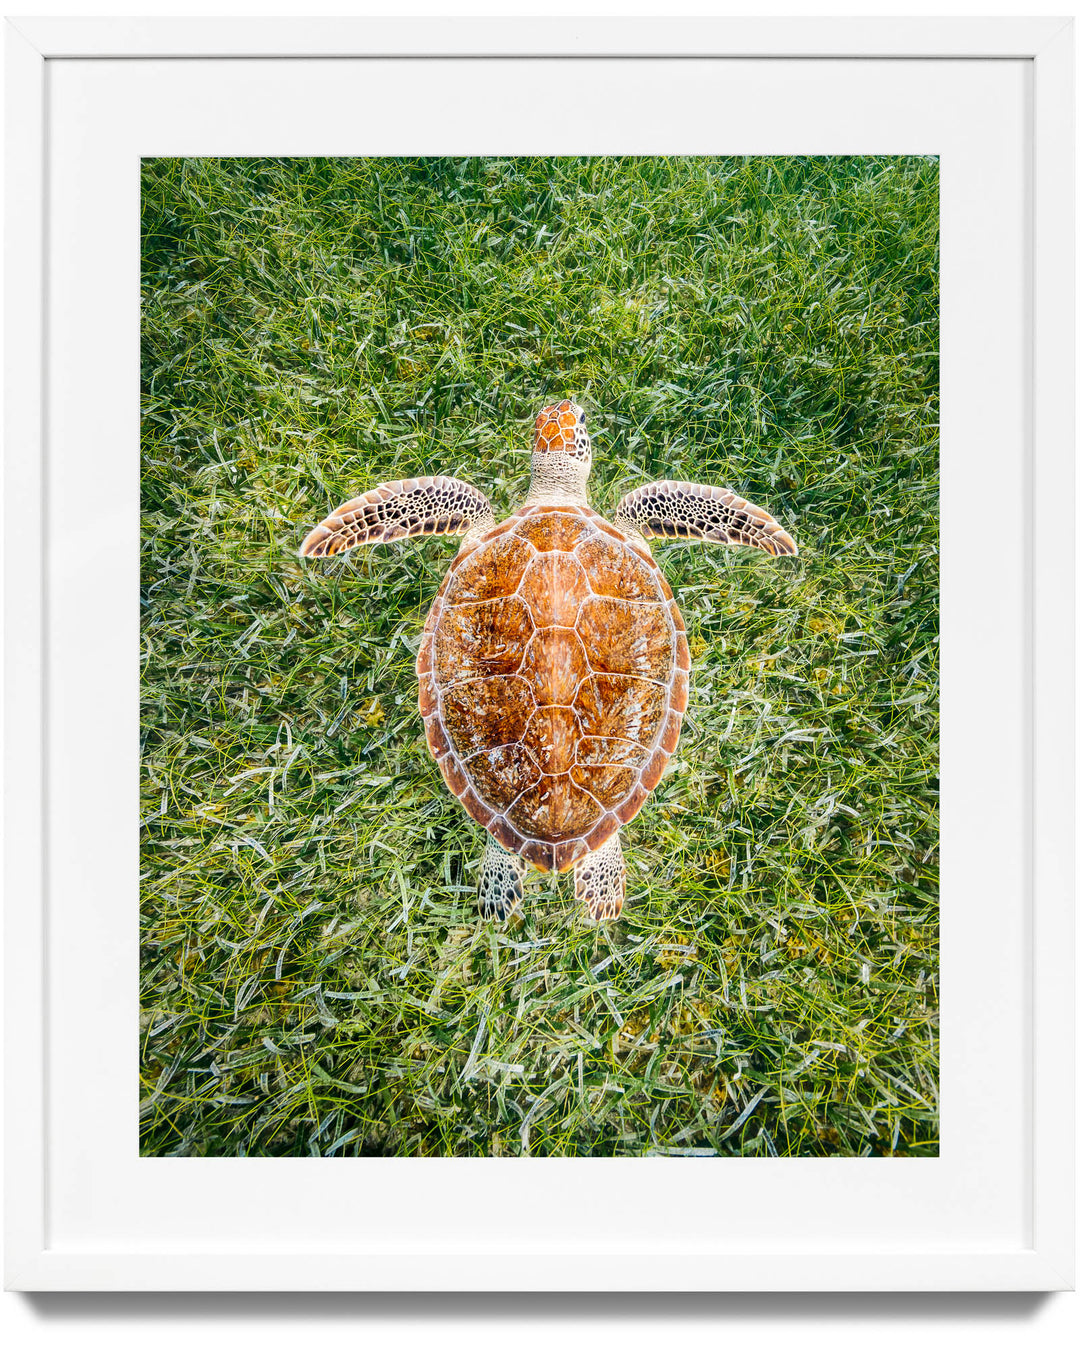 Framed print of a sea turtle in Turks and Caicos